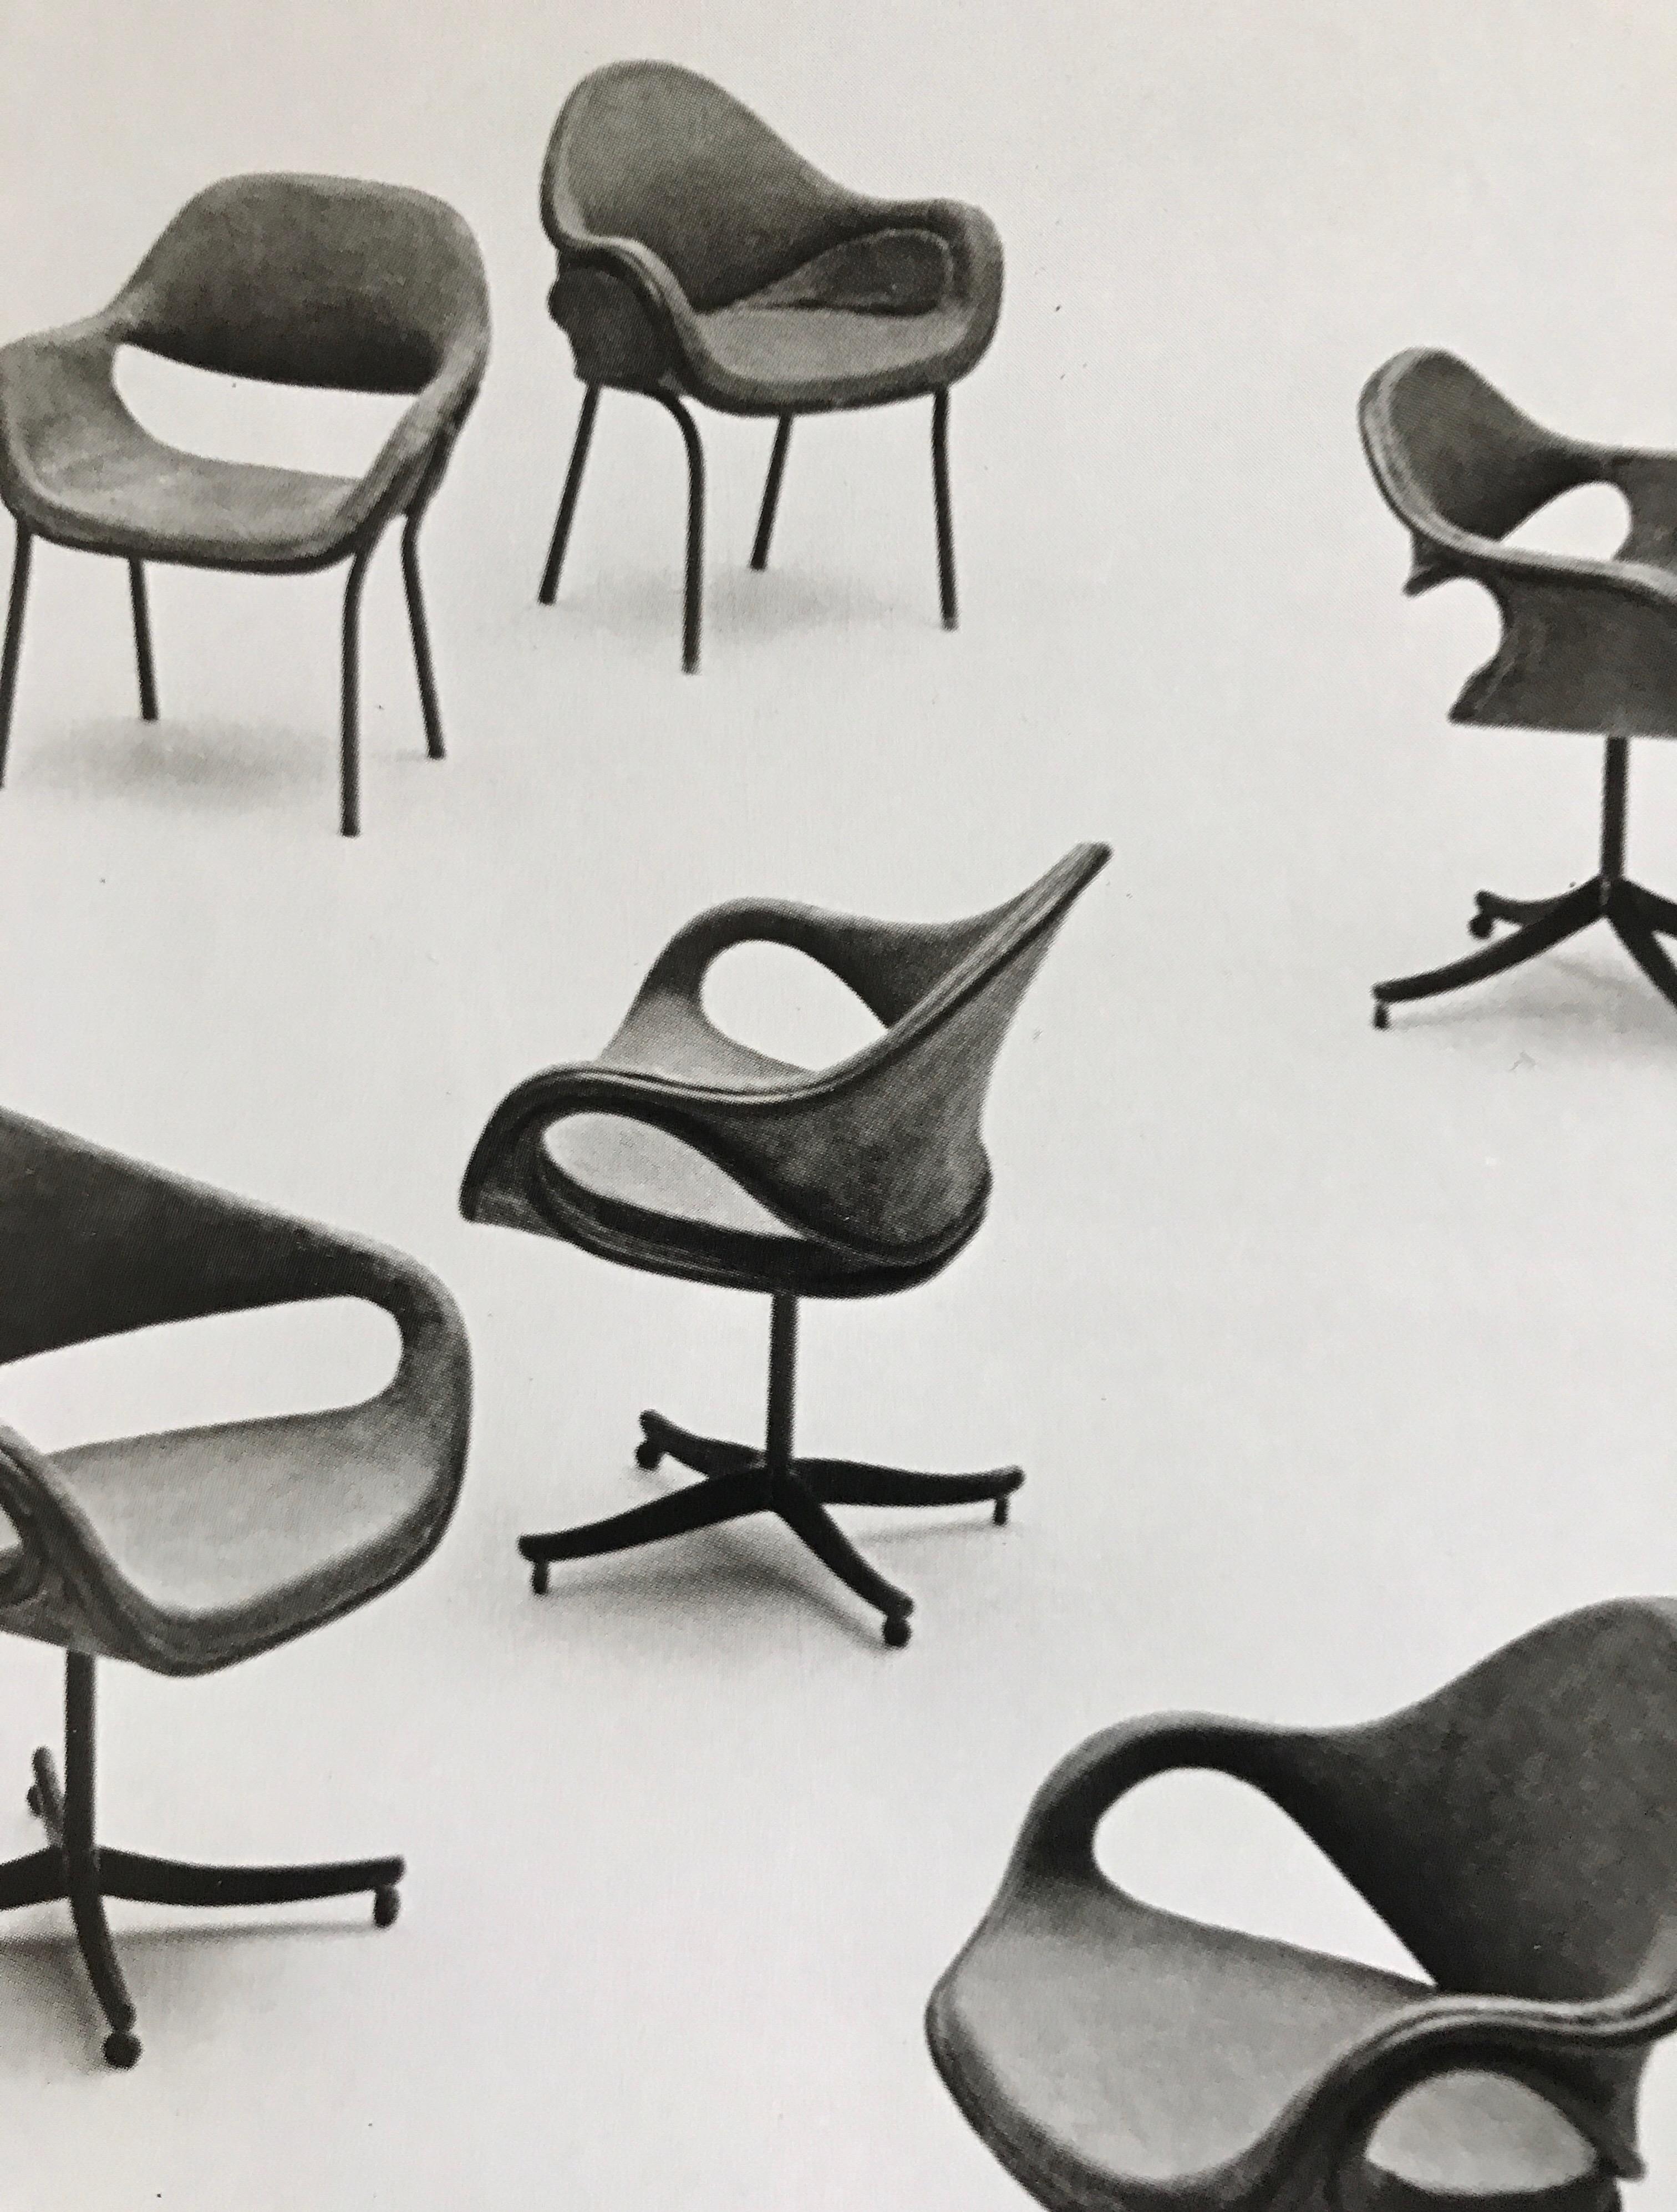 20th Century Knoll Design a Book by Eric Larrabee and Massimo Vignelli